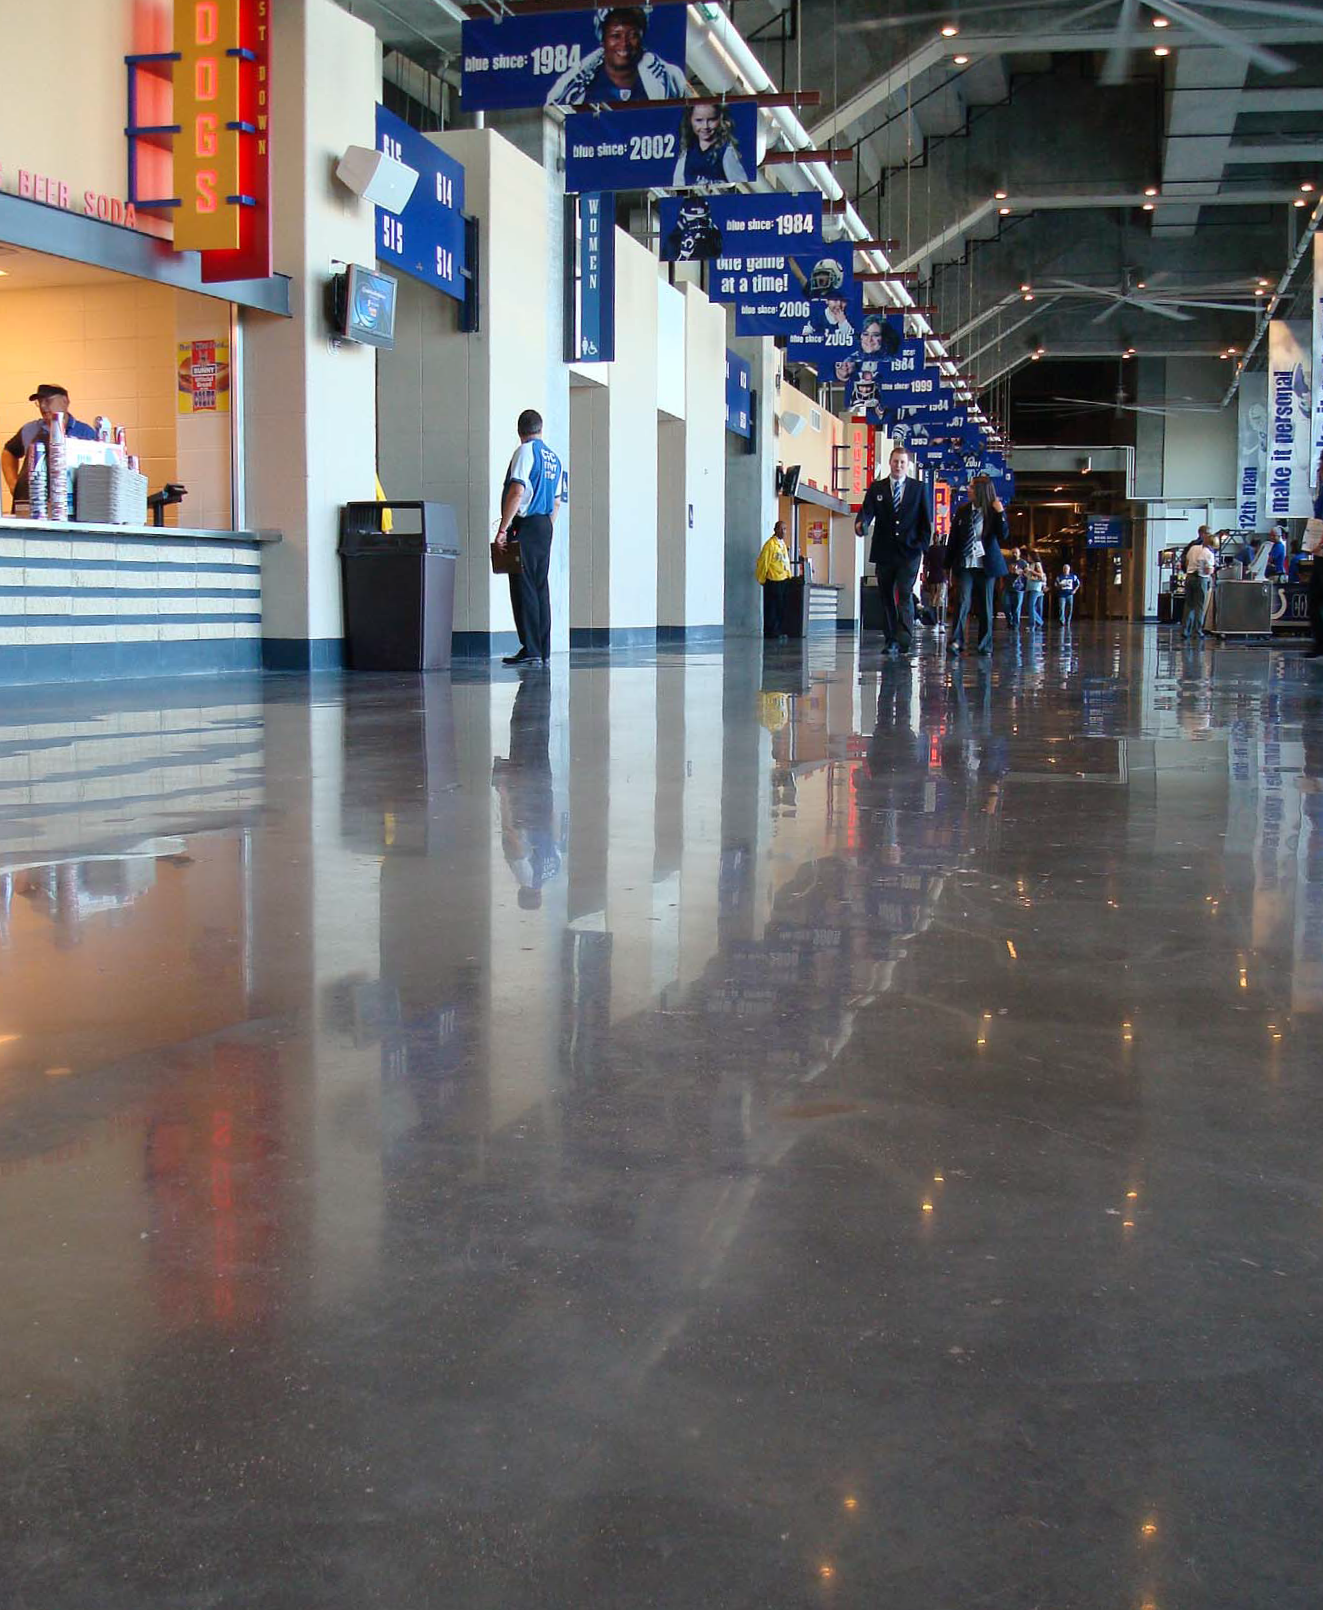 Lucas Oil Stadium, home of the Indianapolis Colts pro football team, as polished by American Concrete Concepts inc., of Springdale, Ark. Photos courtesy of American Concrete Concepts Inc.